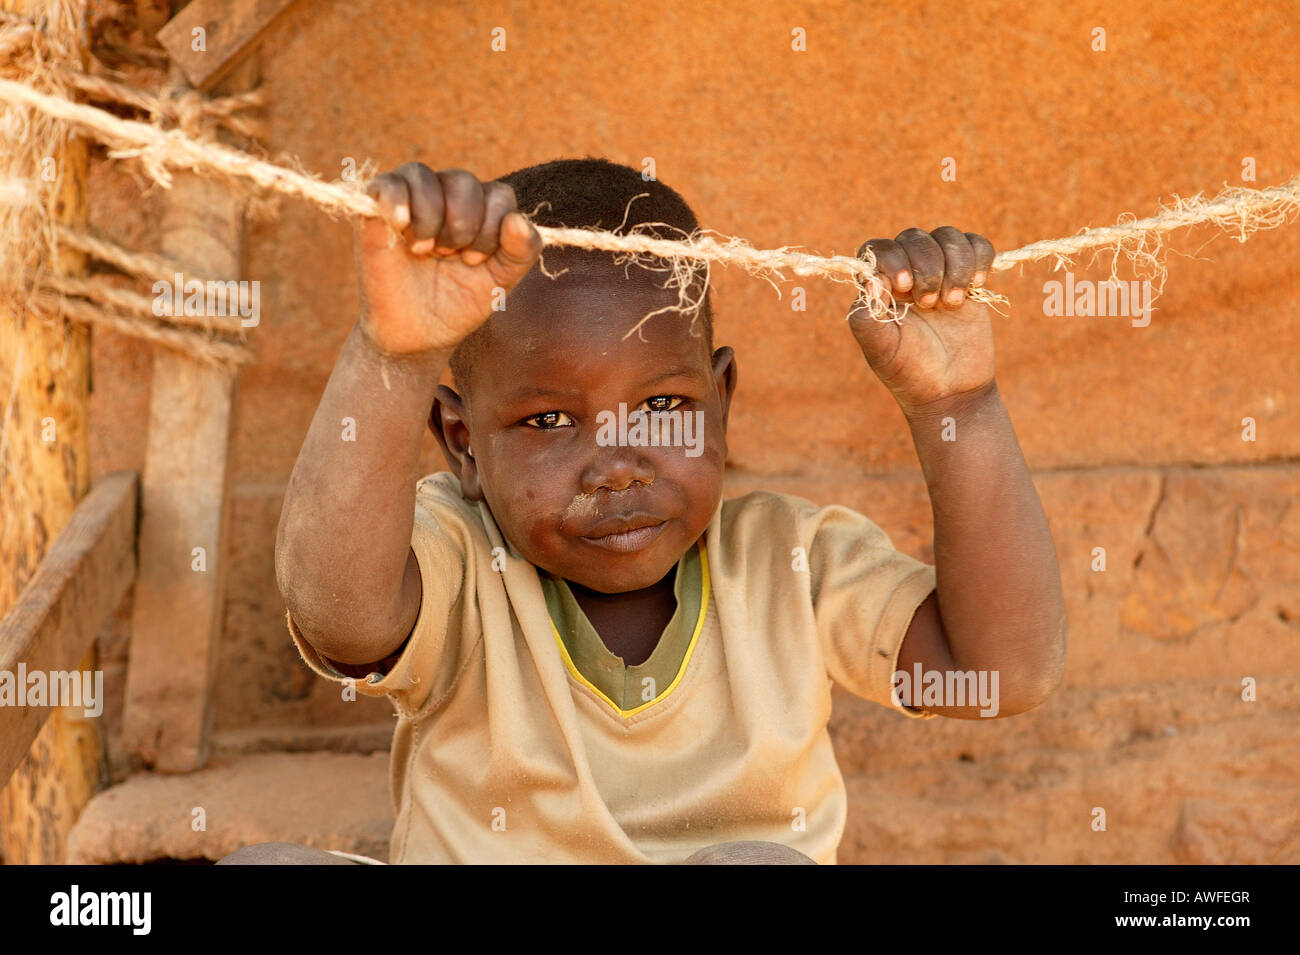 Boy clutching a rope, Cameroon, Africa Stock Photo